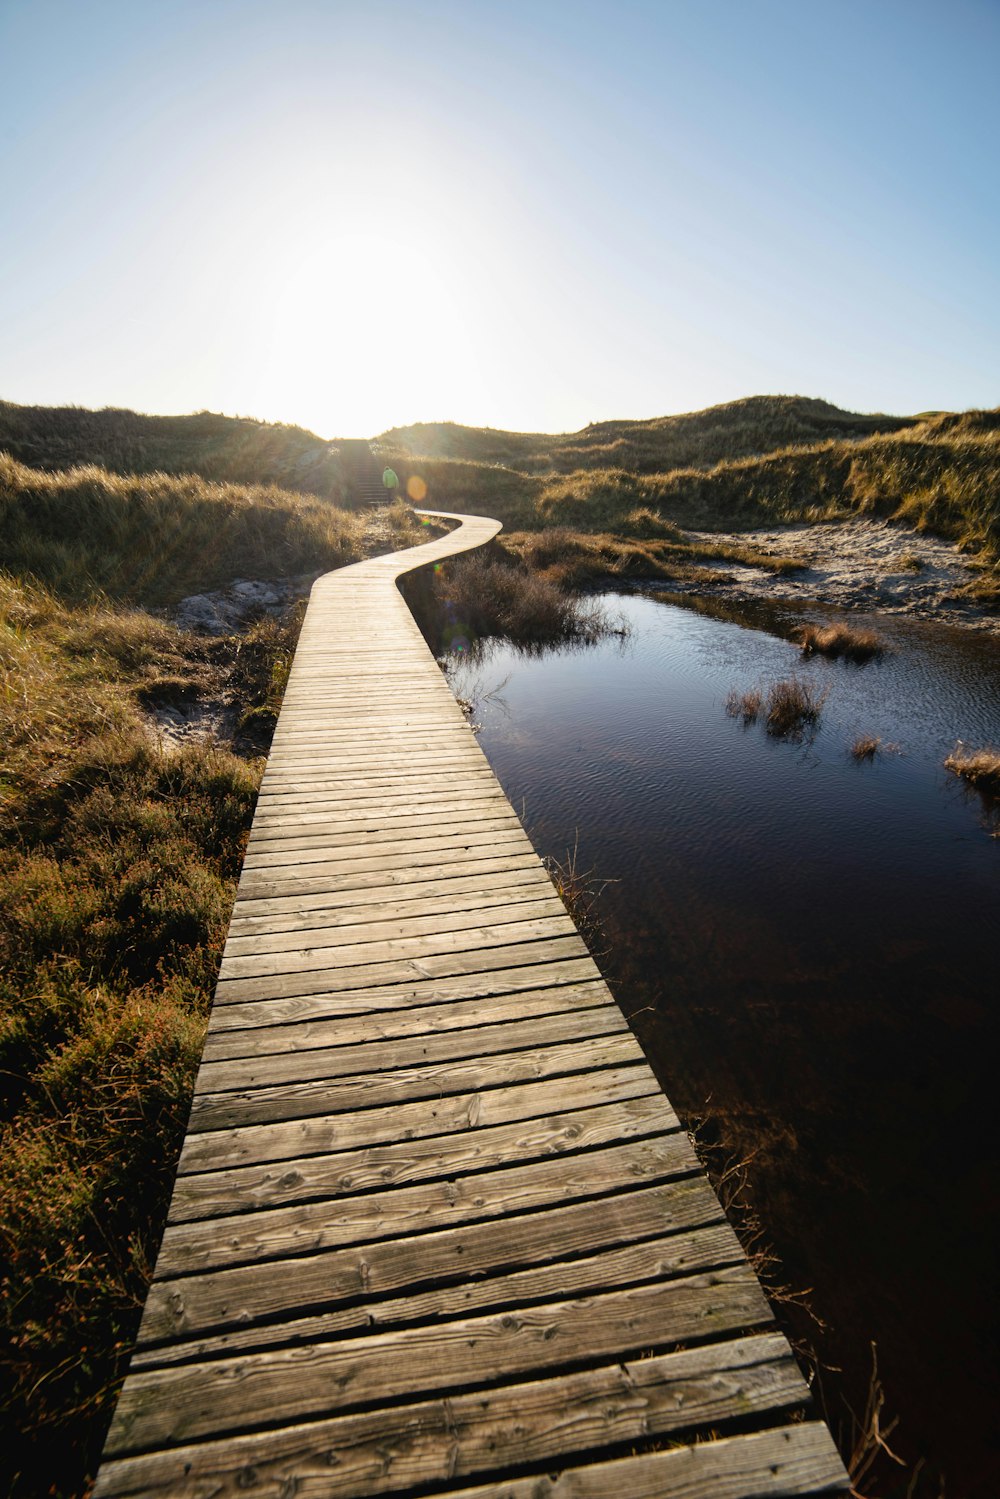 a wooden walkway over a small body of water